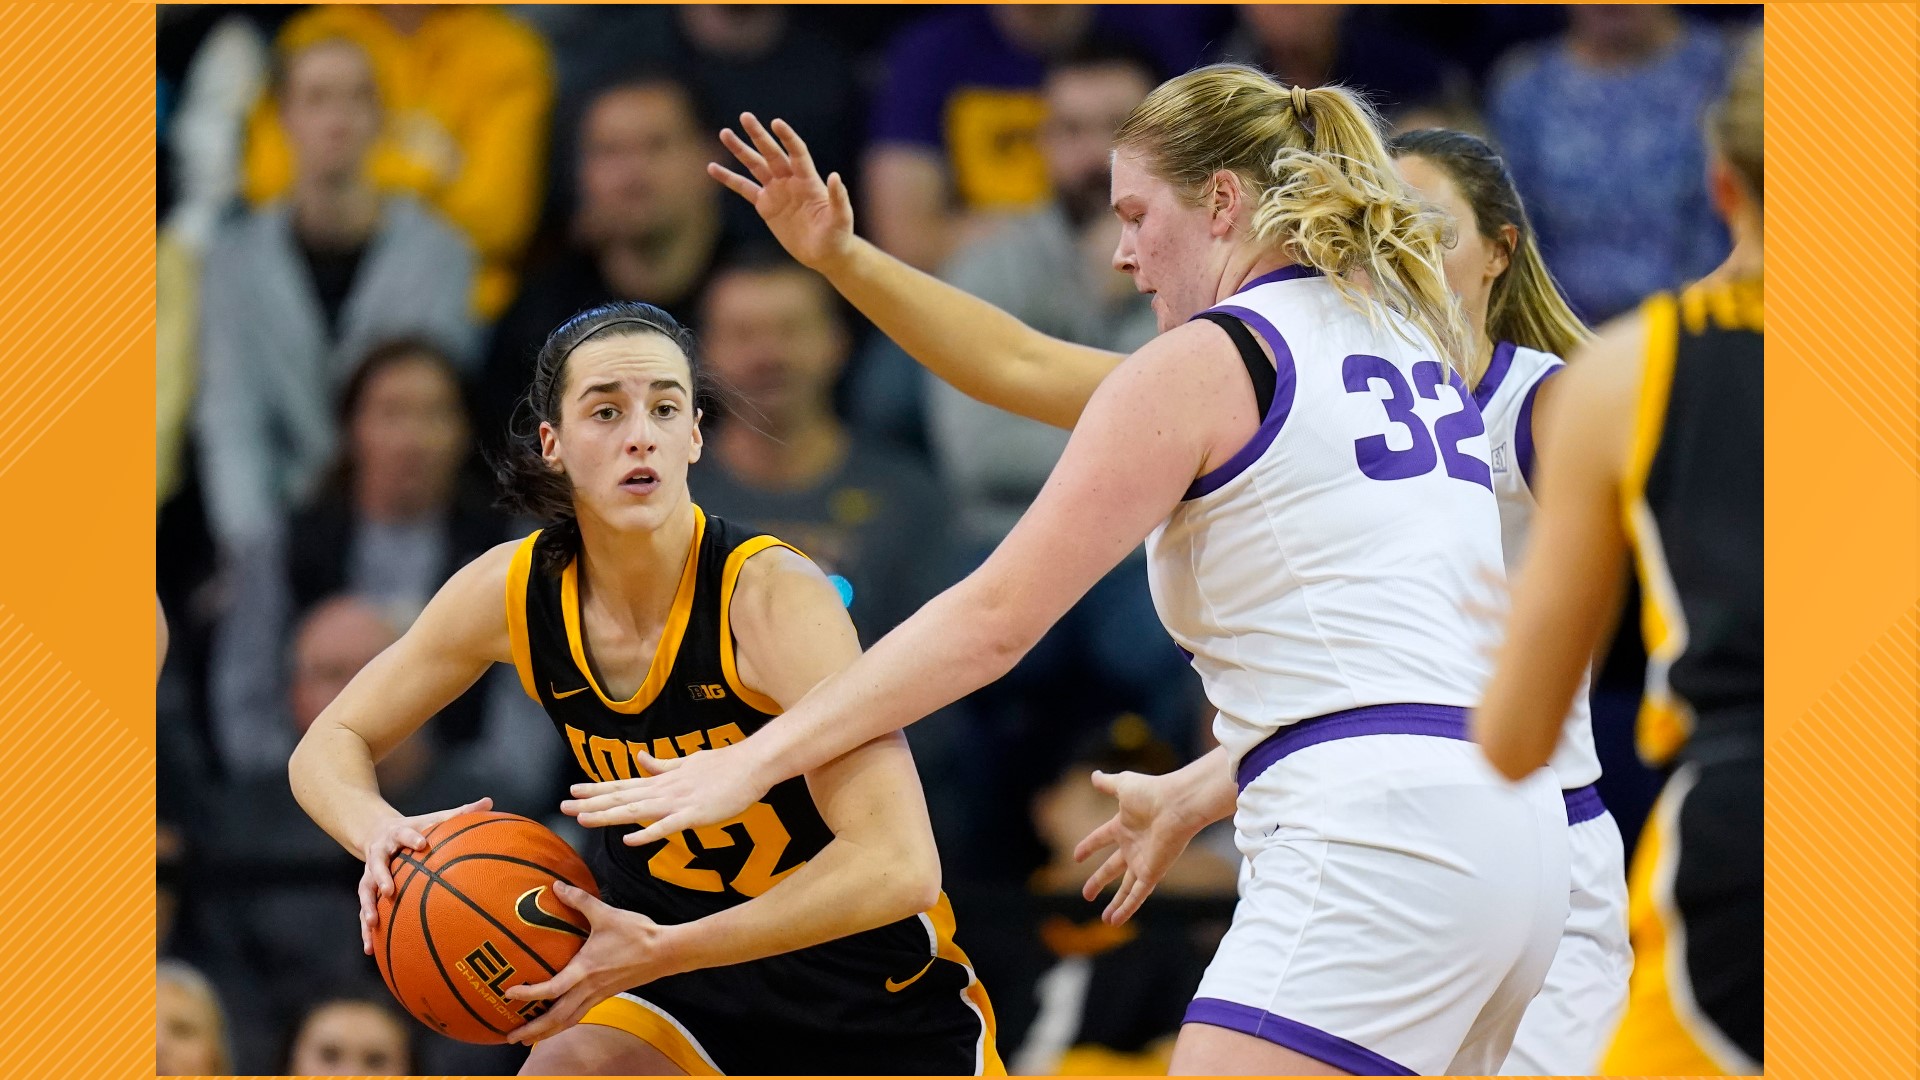 Caitlin Clark became Iowa’s all-time career scoring leader and finished with the 12th triple-double of her career as the No. 3 Hawkeyes beat Northern Iowa 94-53.